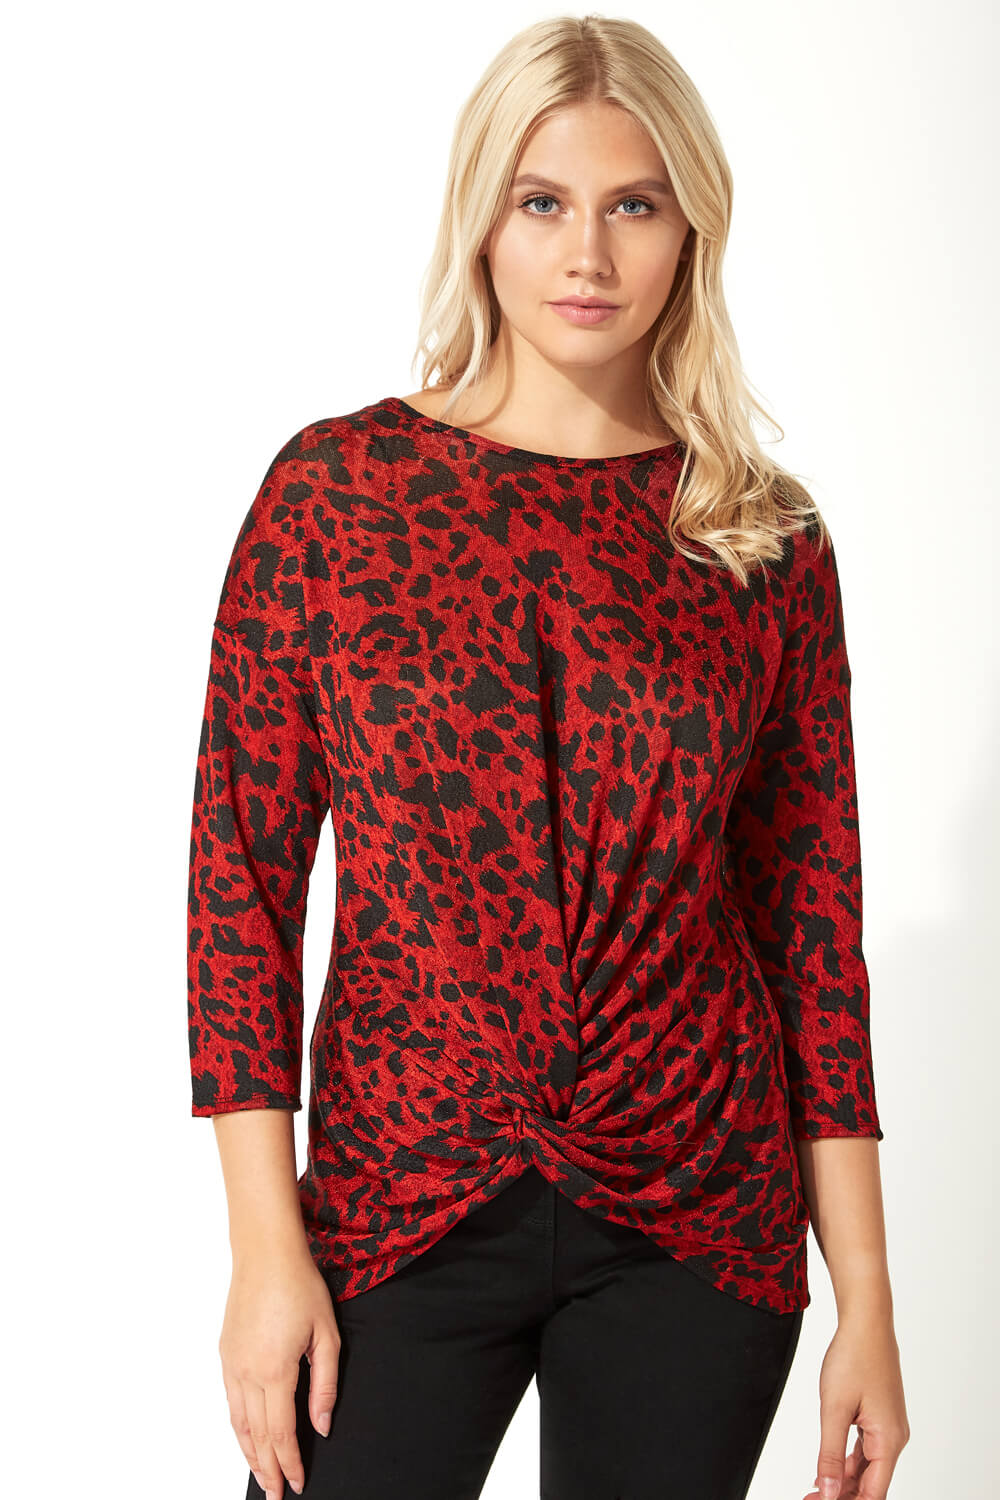 Red Animal Print Twist Front Top, Image 4 of 5